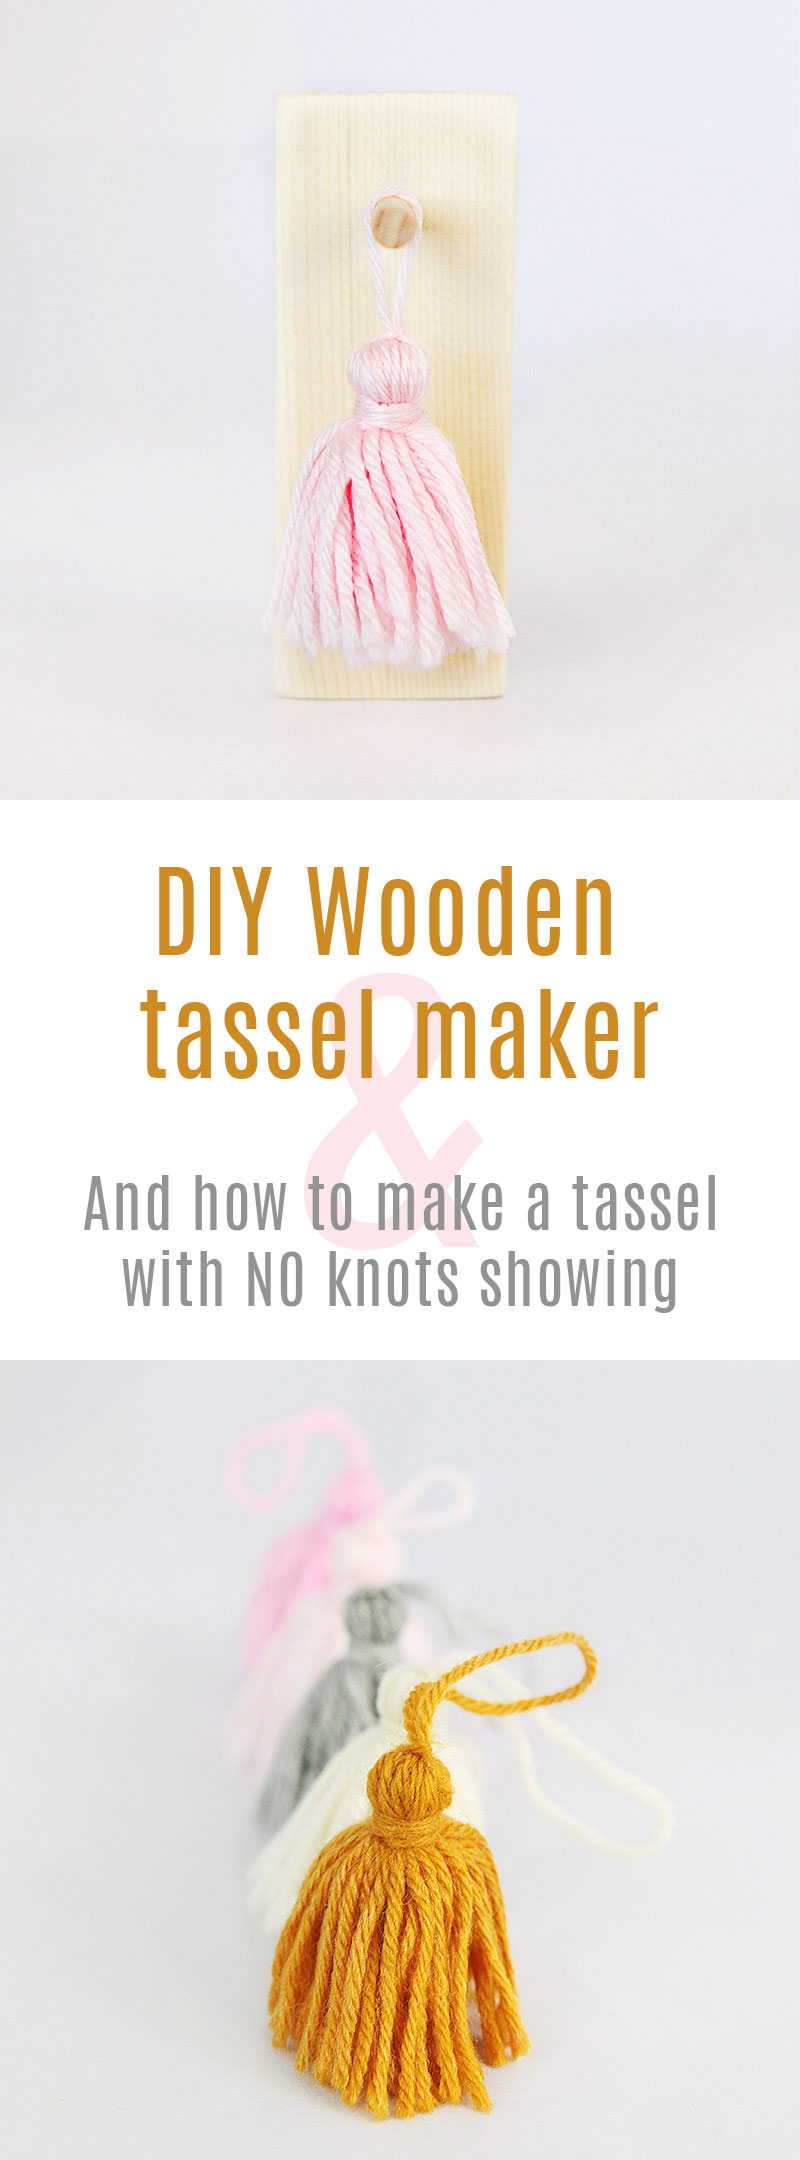 Wooden tassel maker and make a tassel without visible knot pin